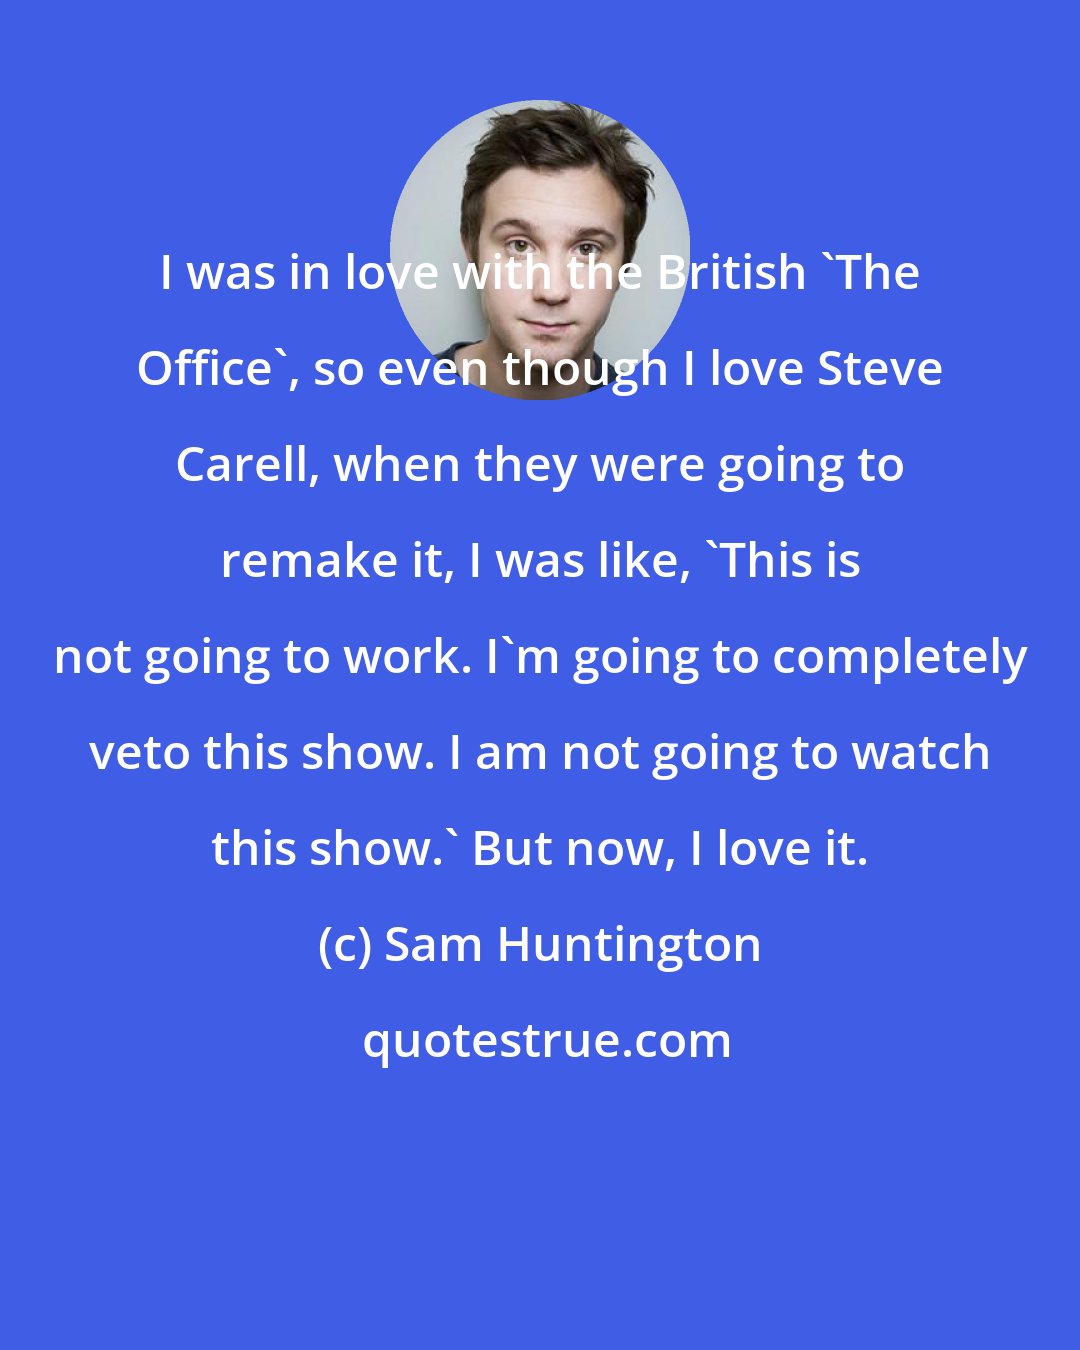 Sam Huntington: I was in love with the British 'The Office', so even though I love Steve Carell, when they were going to remake it, I was like, 'This is not going to work. I'm going to completely veto this show. I am not going to watch this show.' But now, I love it.